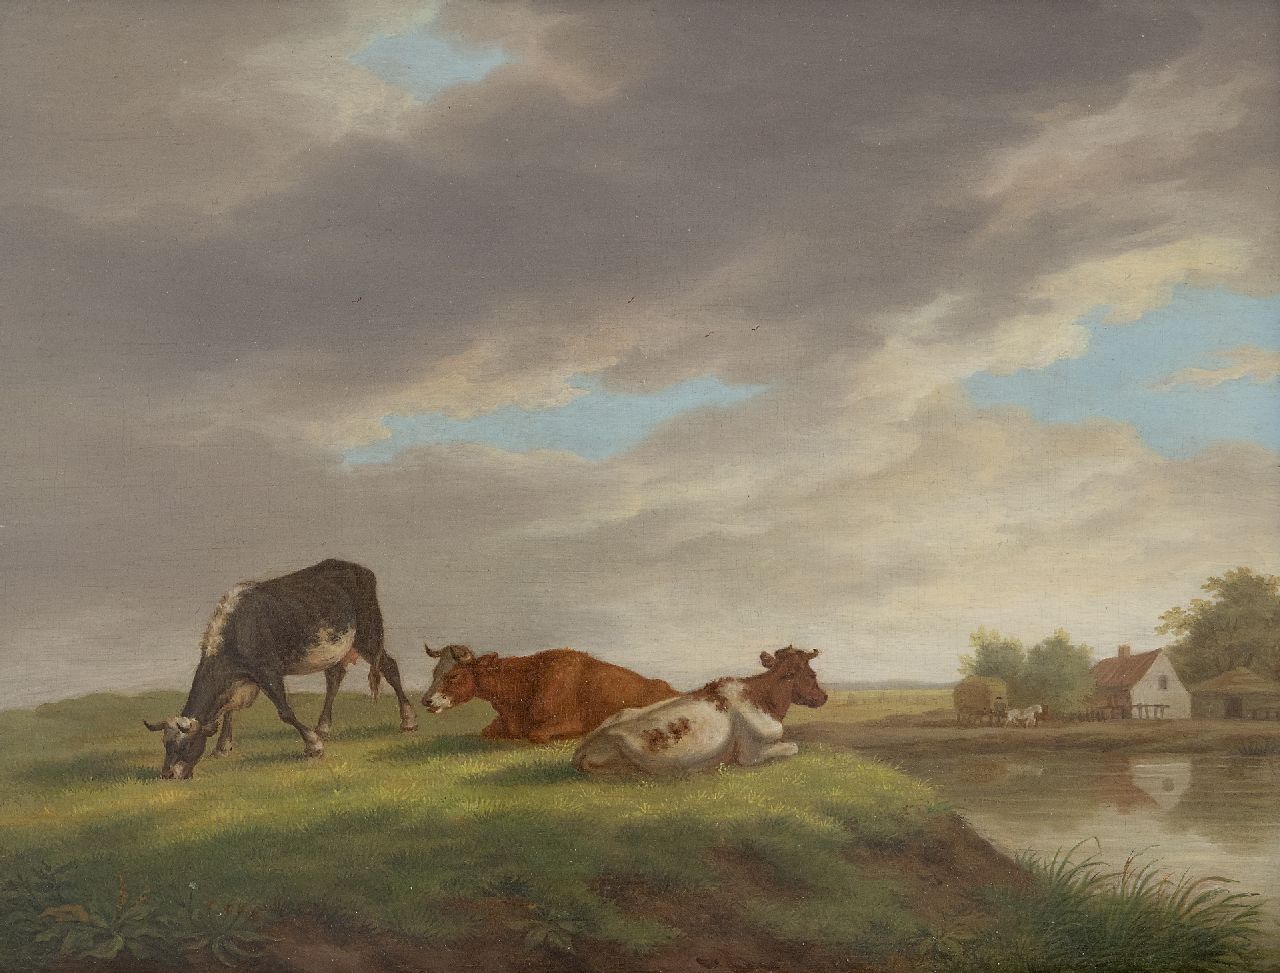 Hendrik Adam van der Burgh | Cows in a landscape with a farm, oil on panel, 20.4 x 26.3 cm, signed l.l. and dated 1821